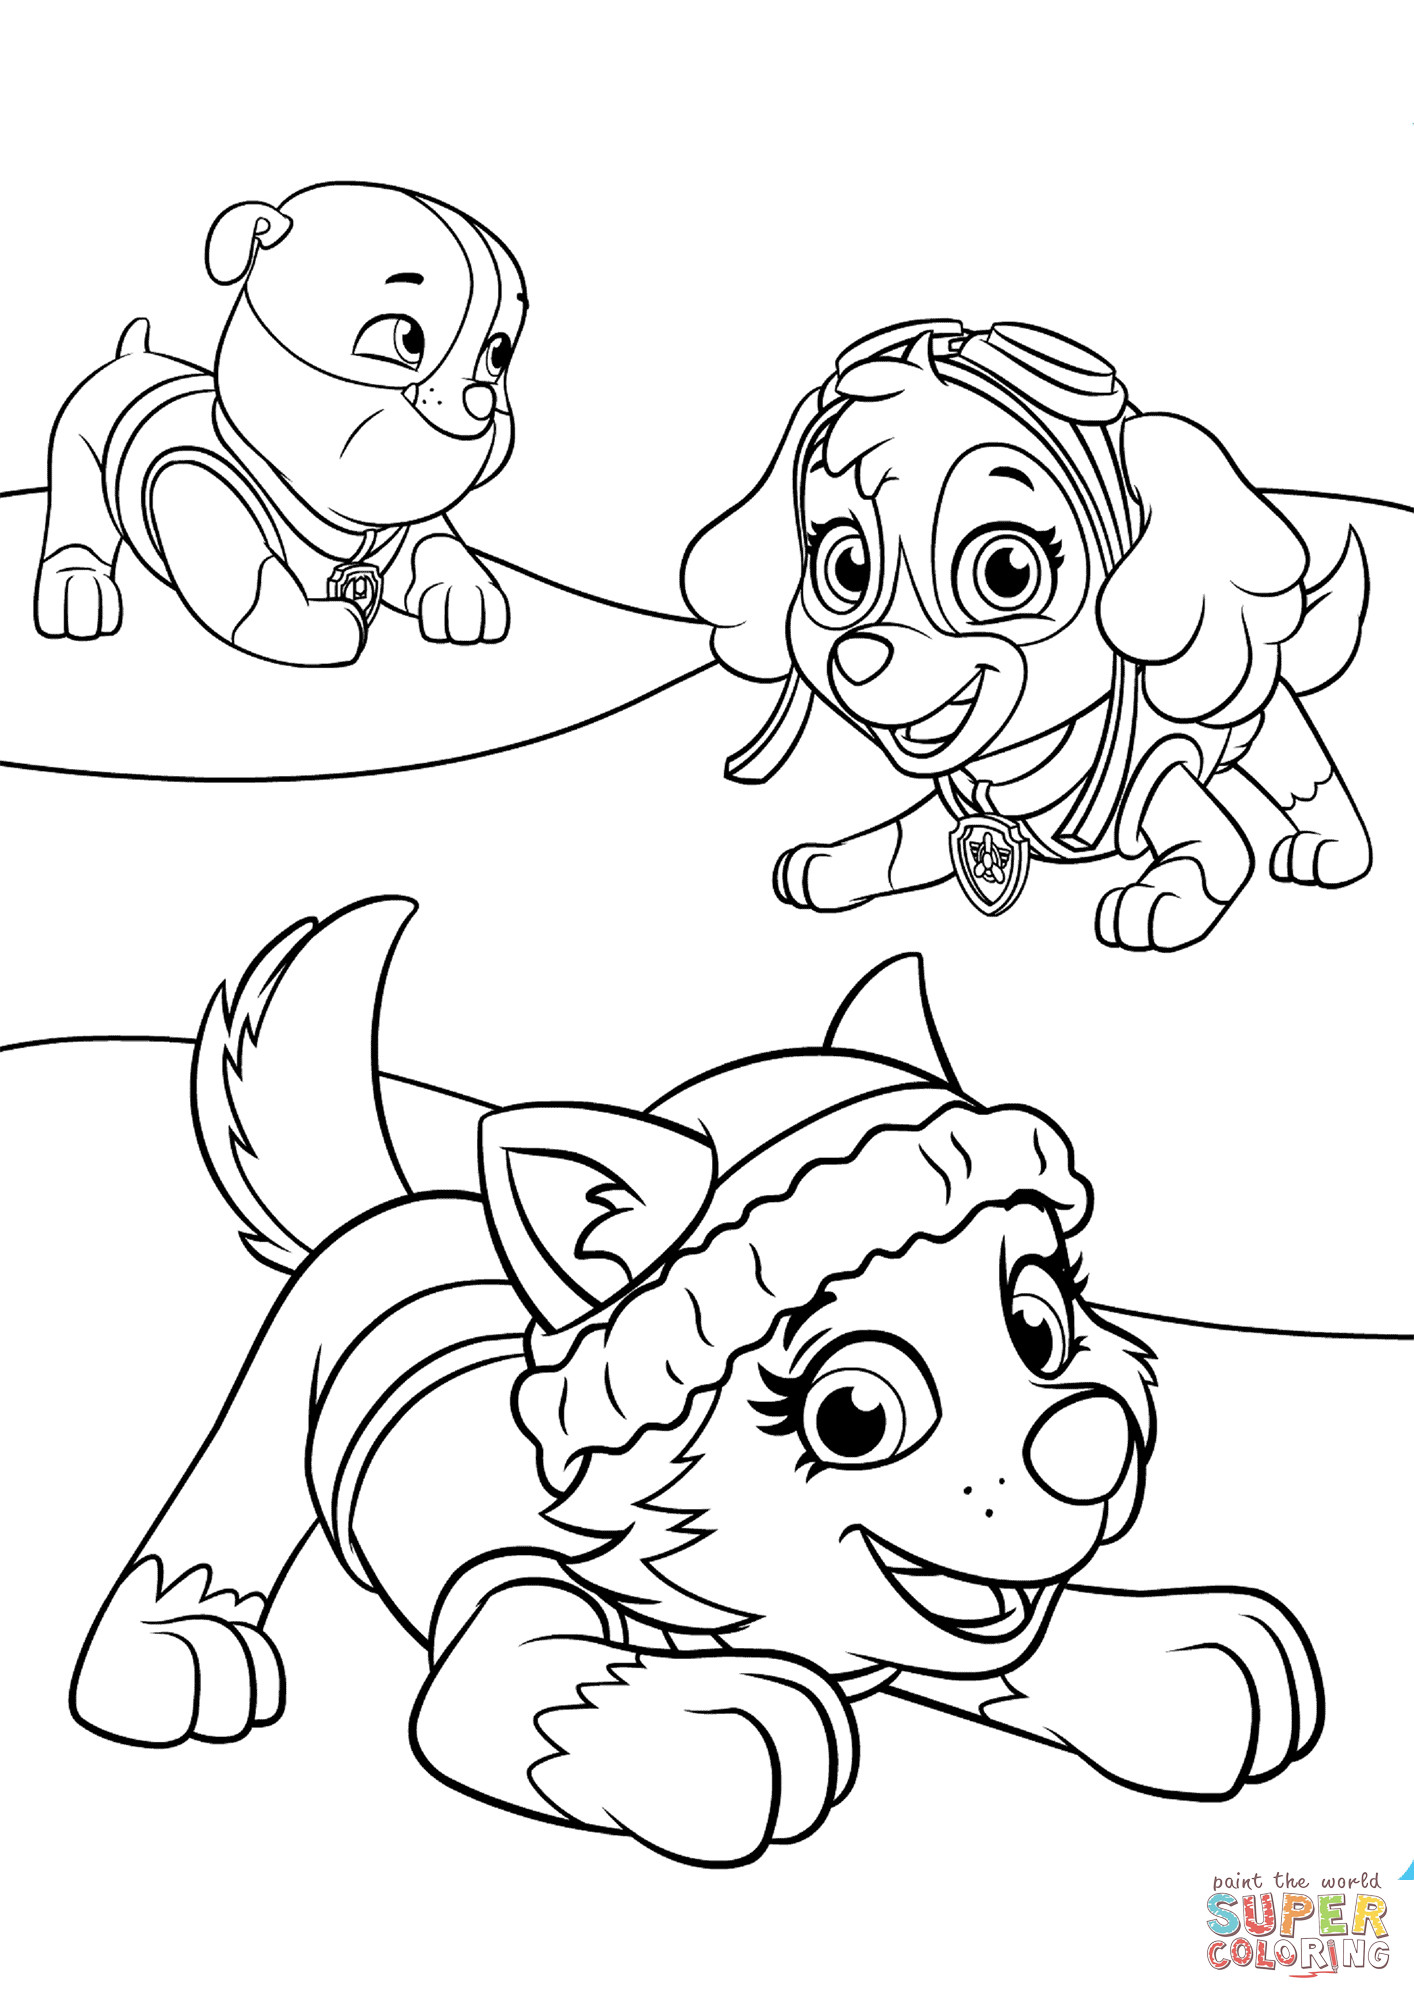 Paw Patrol Coloring Pages Everest
 Everest Plays with Skye and Rubble coloring page